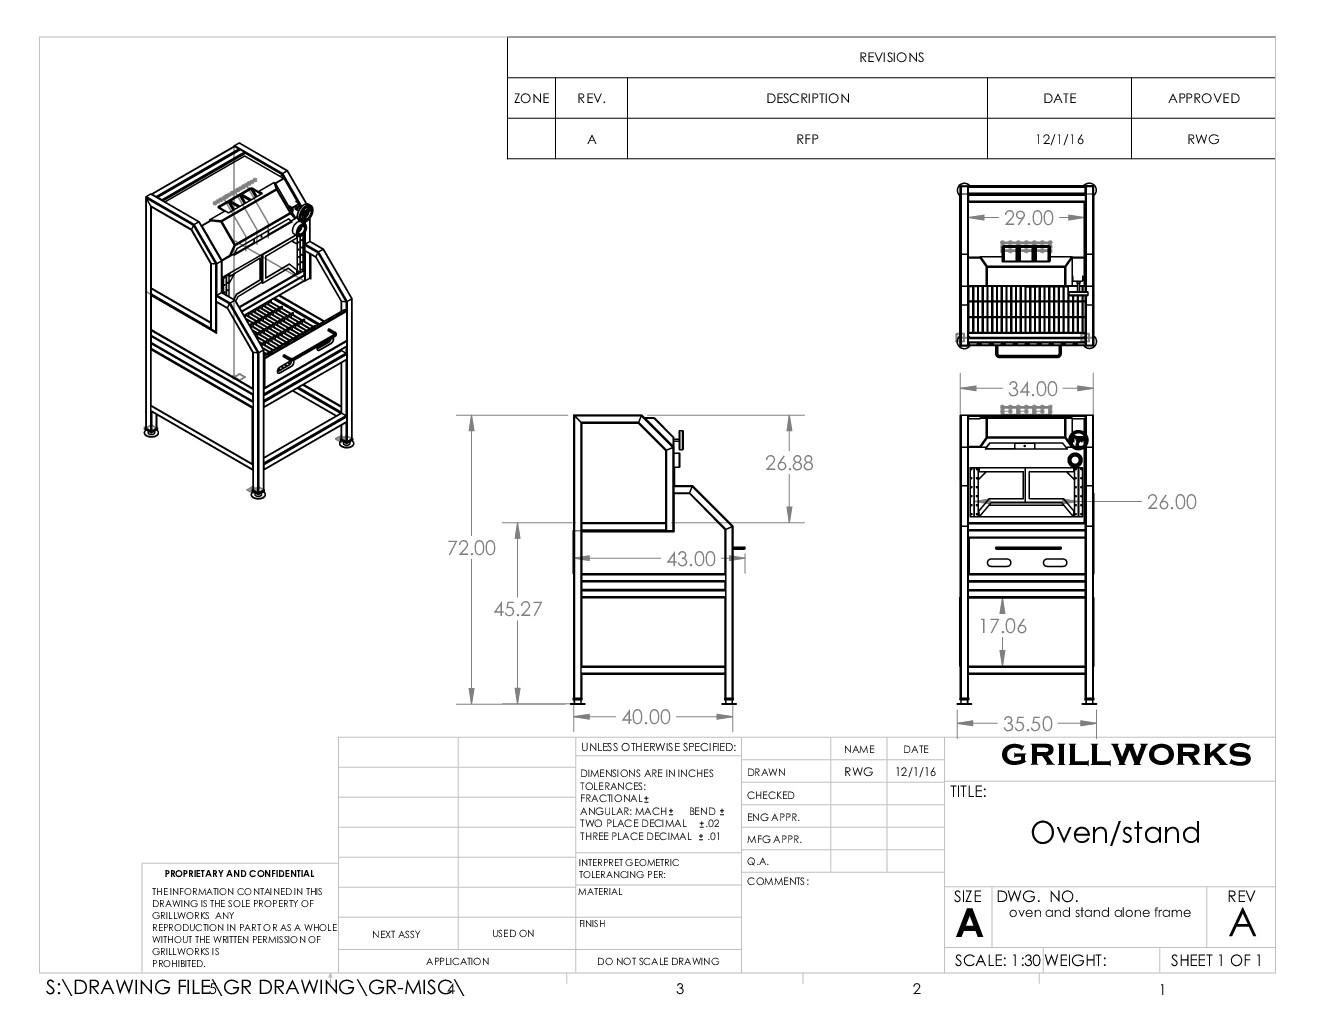 Grillworks Blanco Live Fire Oven - Freestanding